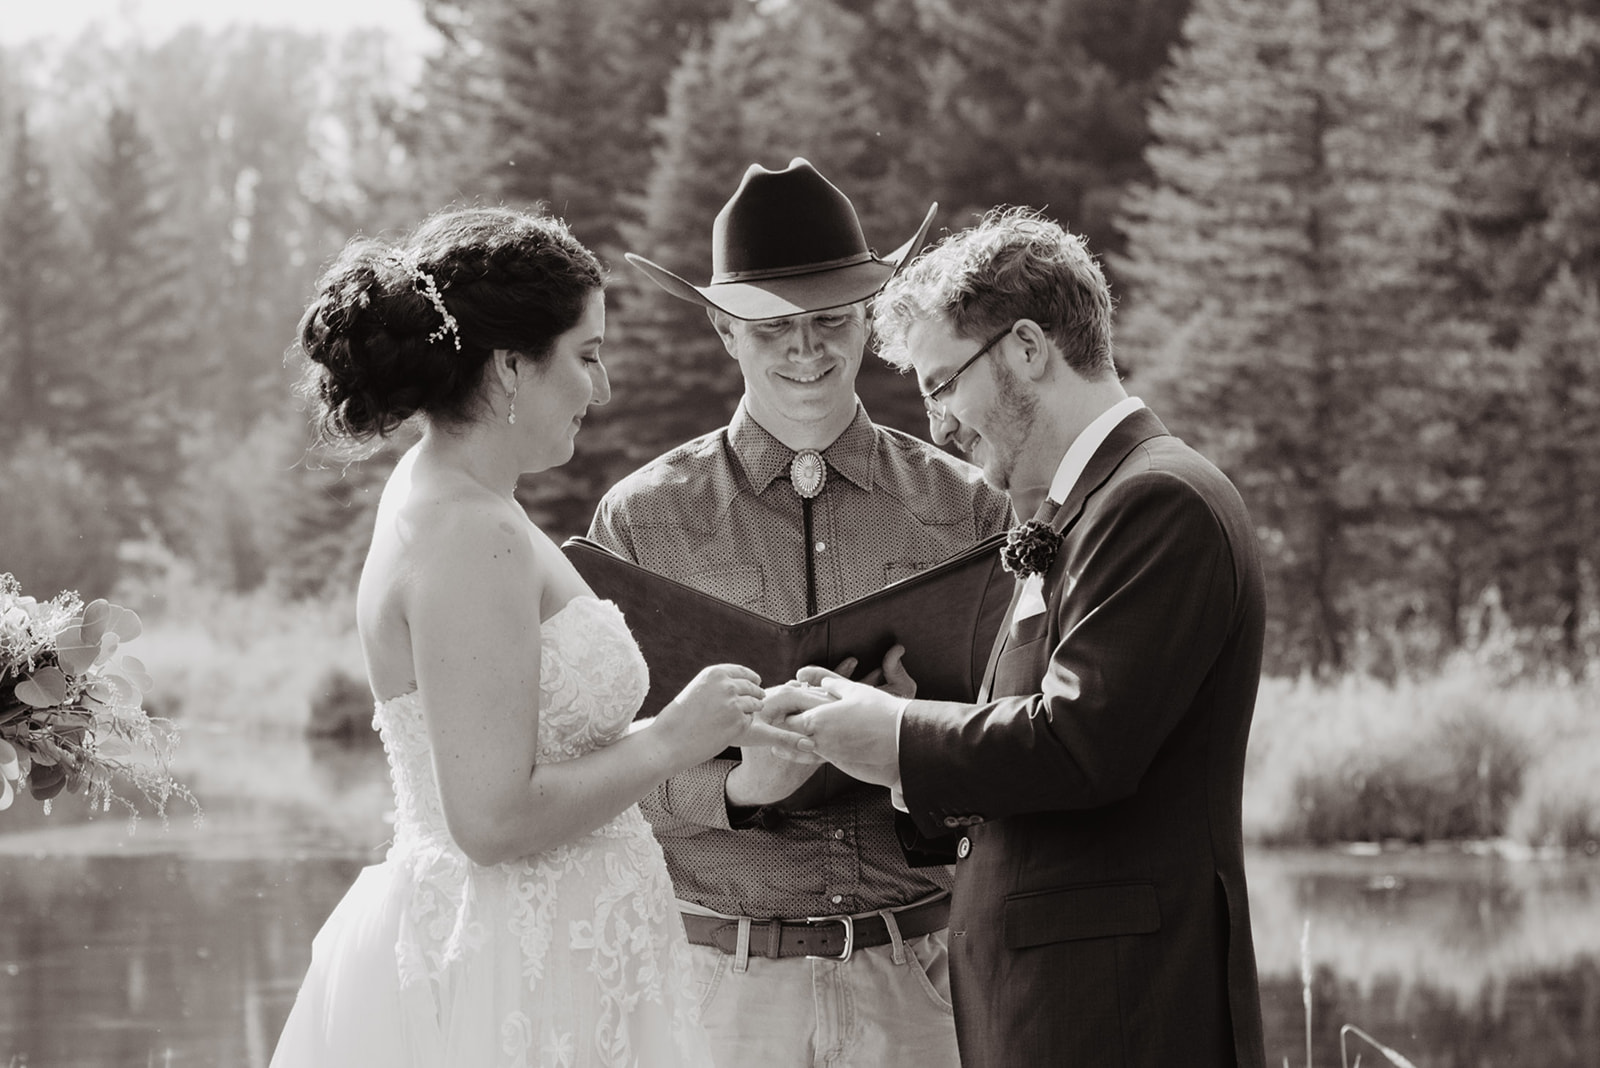 cowboy officiant marries man and woman in Jackson Hole black and white image of wedding day ceremony